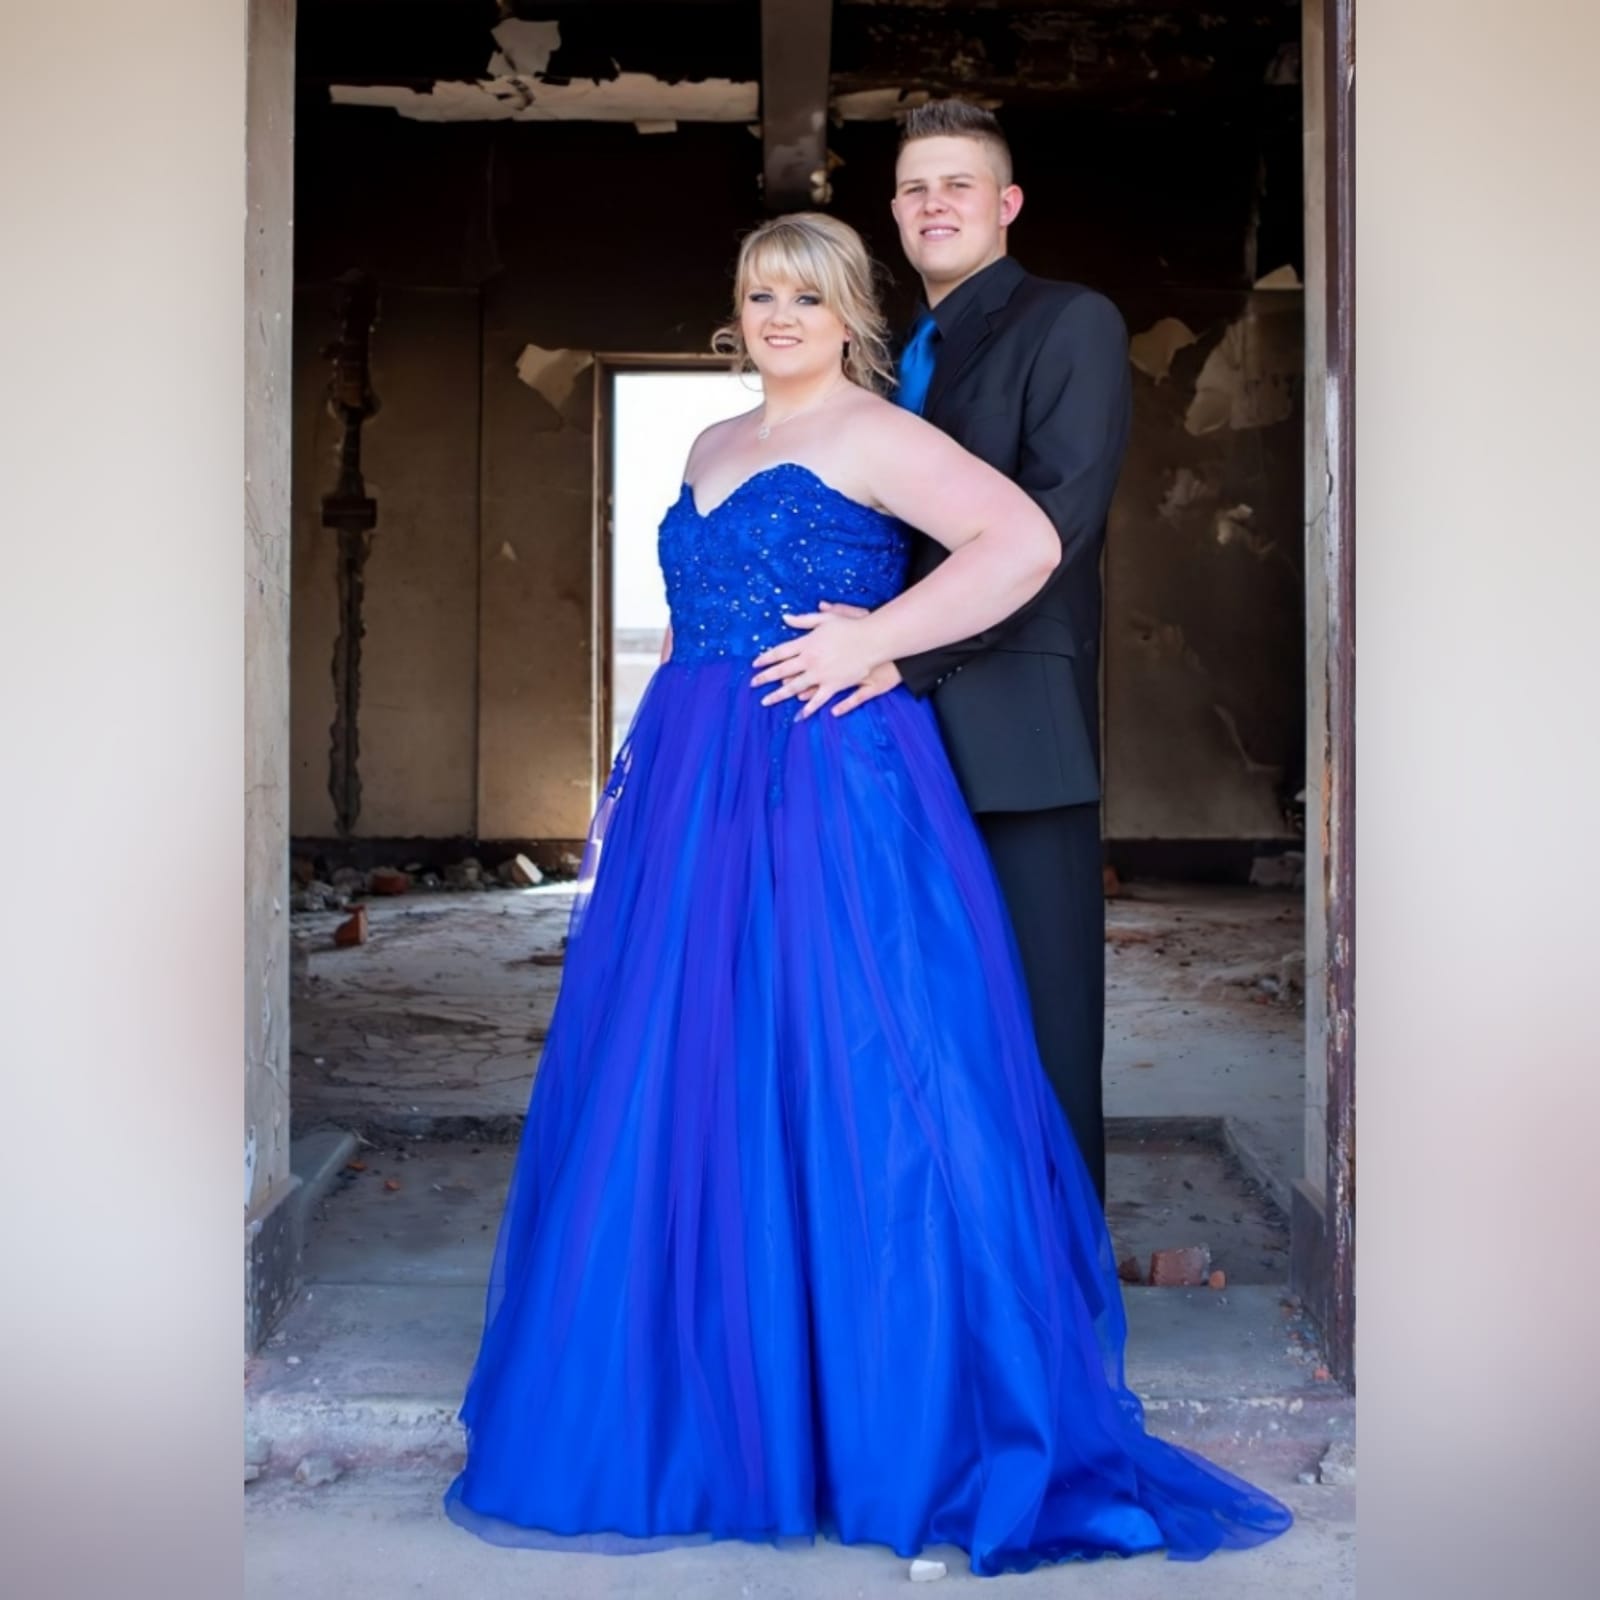 Royal blue boobtube tulle prom dress 3 royal blue boobtube tulle prom dress. Bodice with a sweetheart neckline and detailed with beaded lace falling onto the tulle skirt.